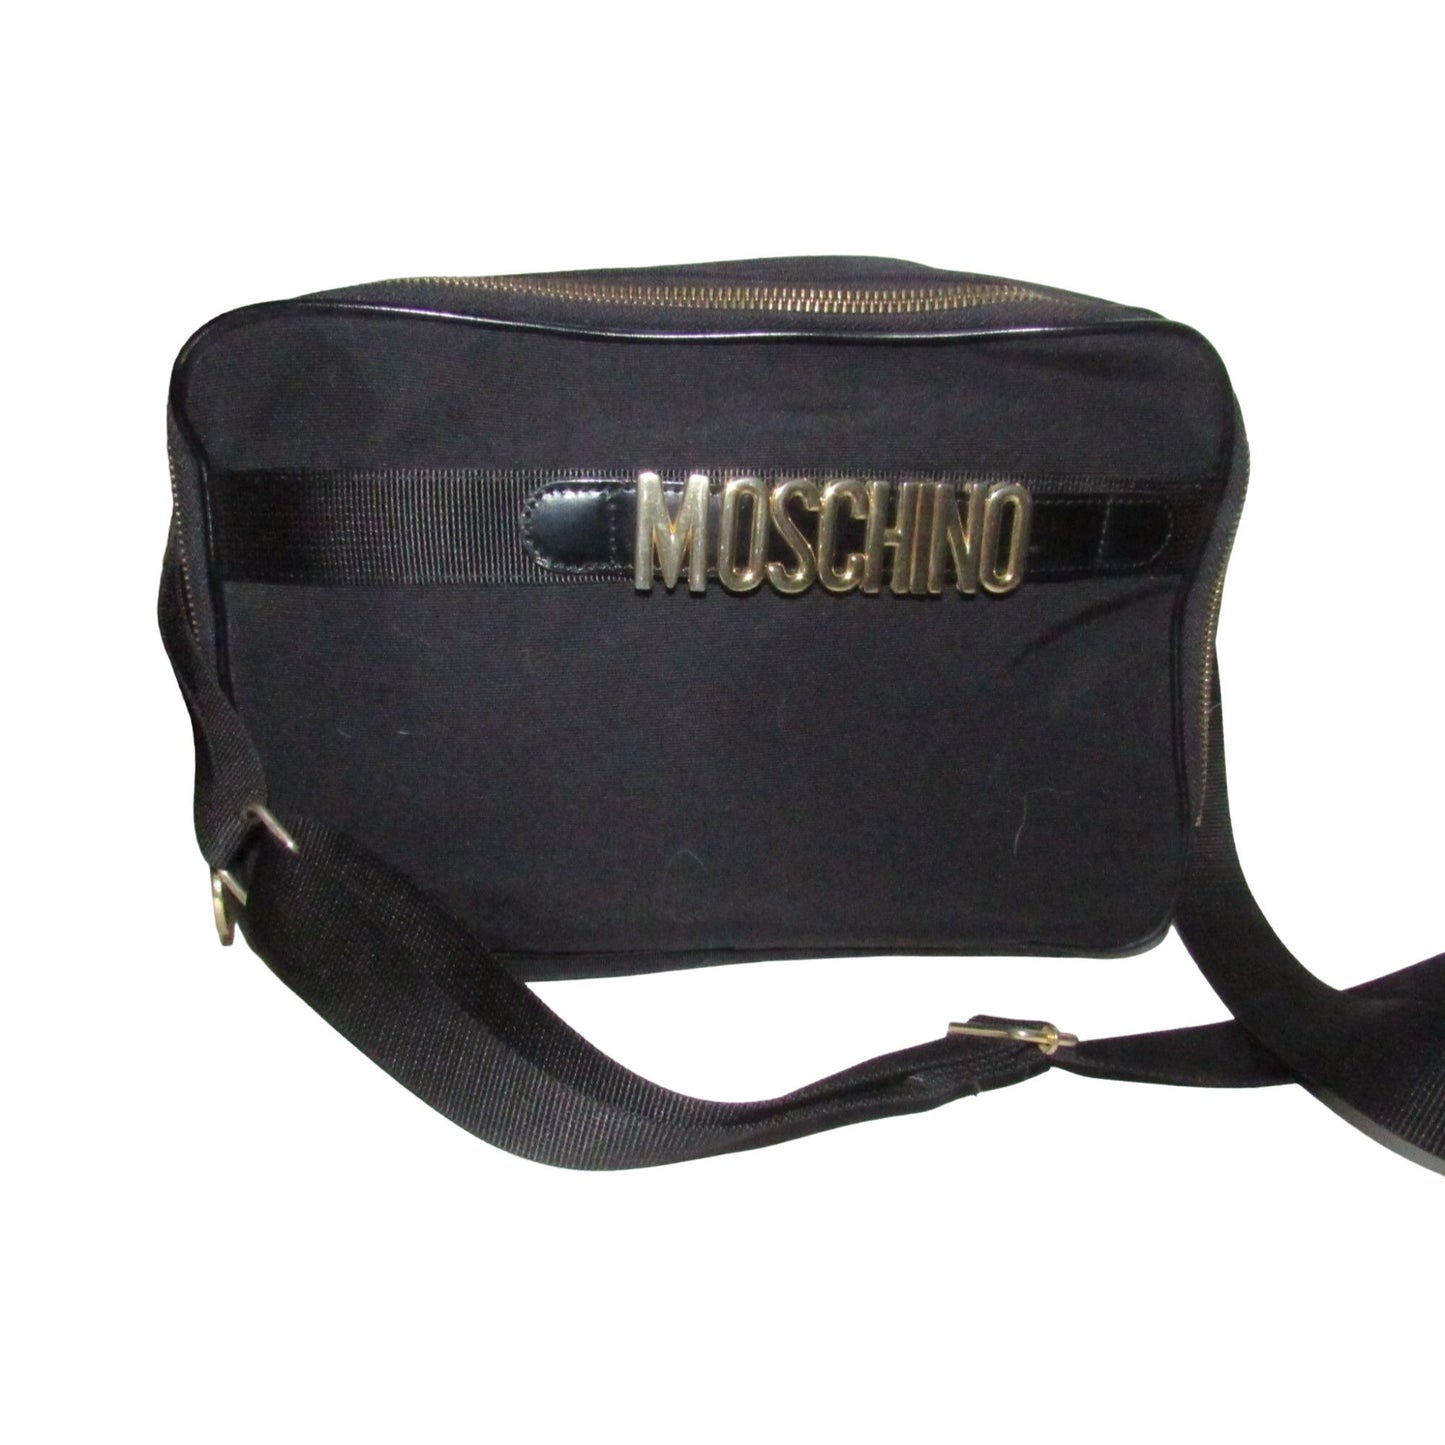 Moschino, black canvas & leather, cross body with a zip top, bold, gold, MOSCHINO letter accents, & a long strap with snaps on both sides